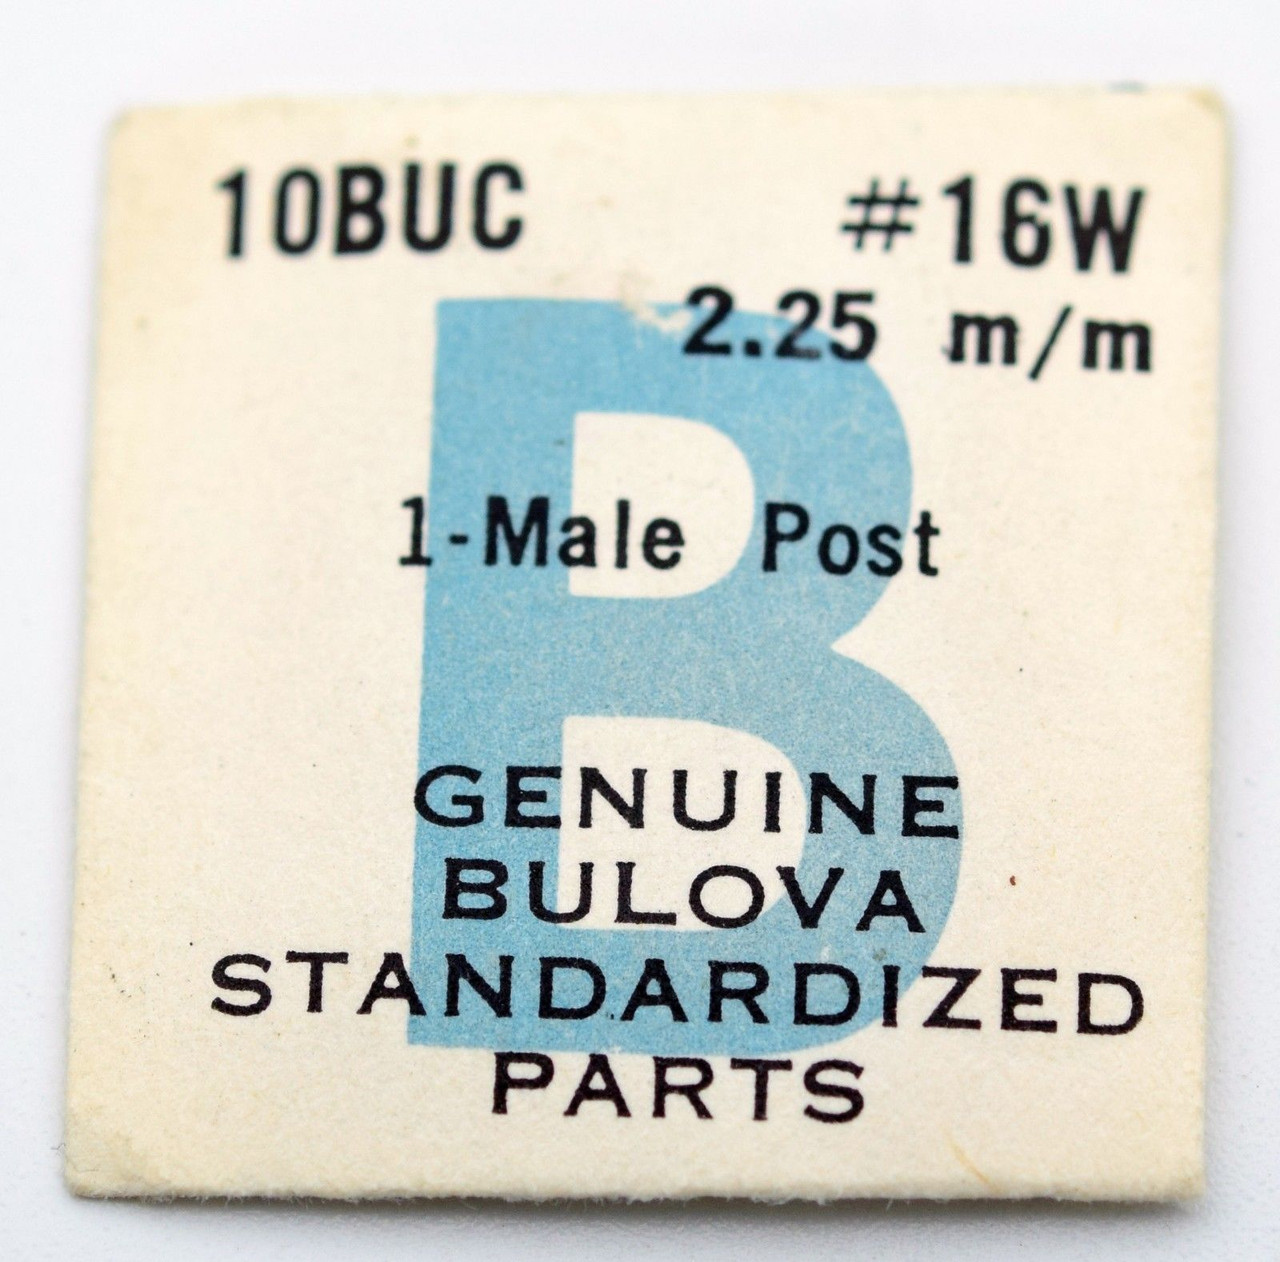 Bulova Male Post For 10BUC Part Number 16W 2.25mm